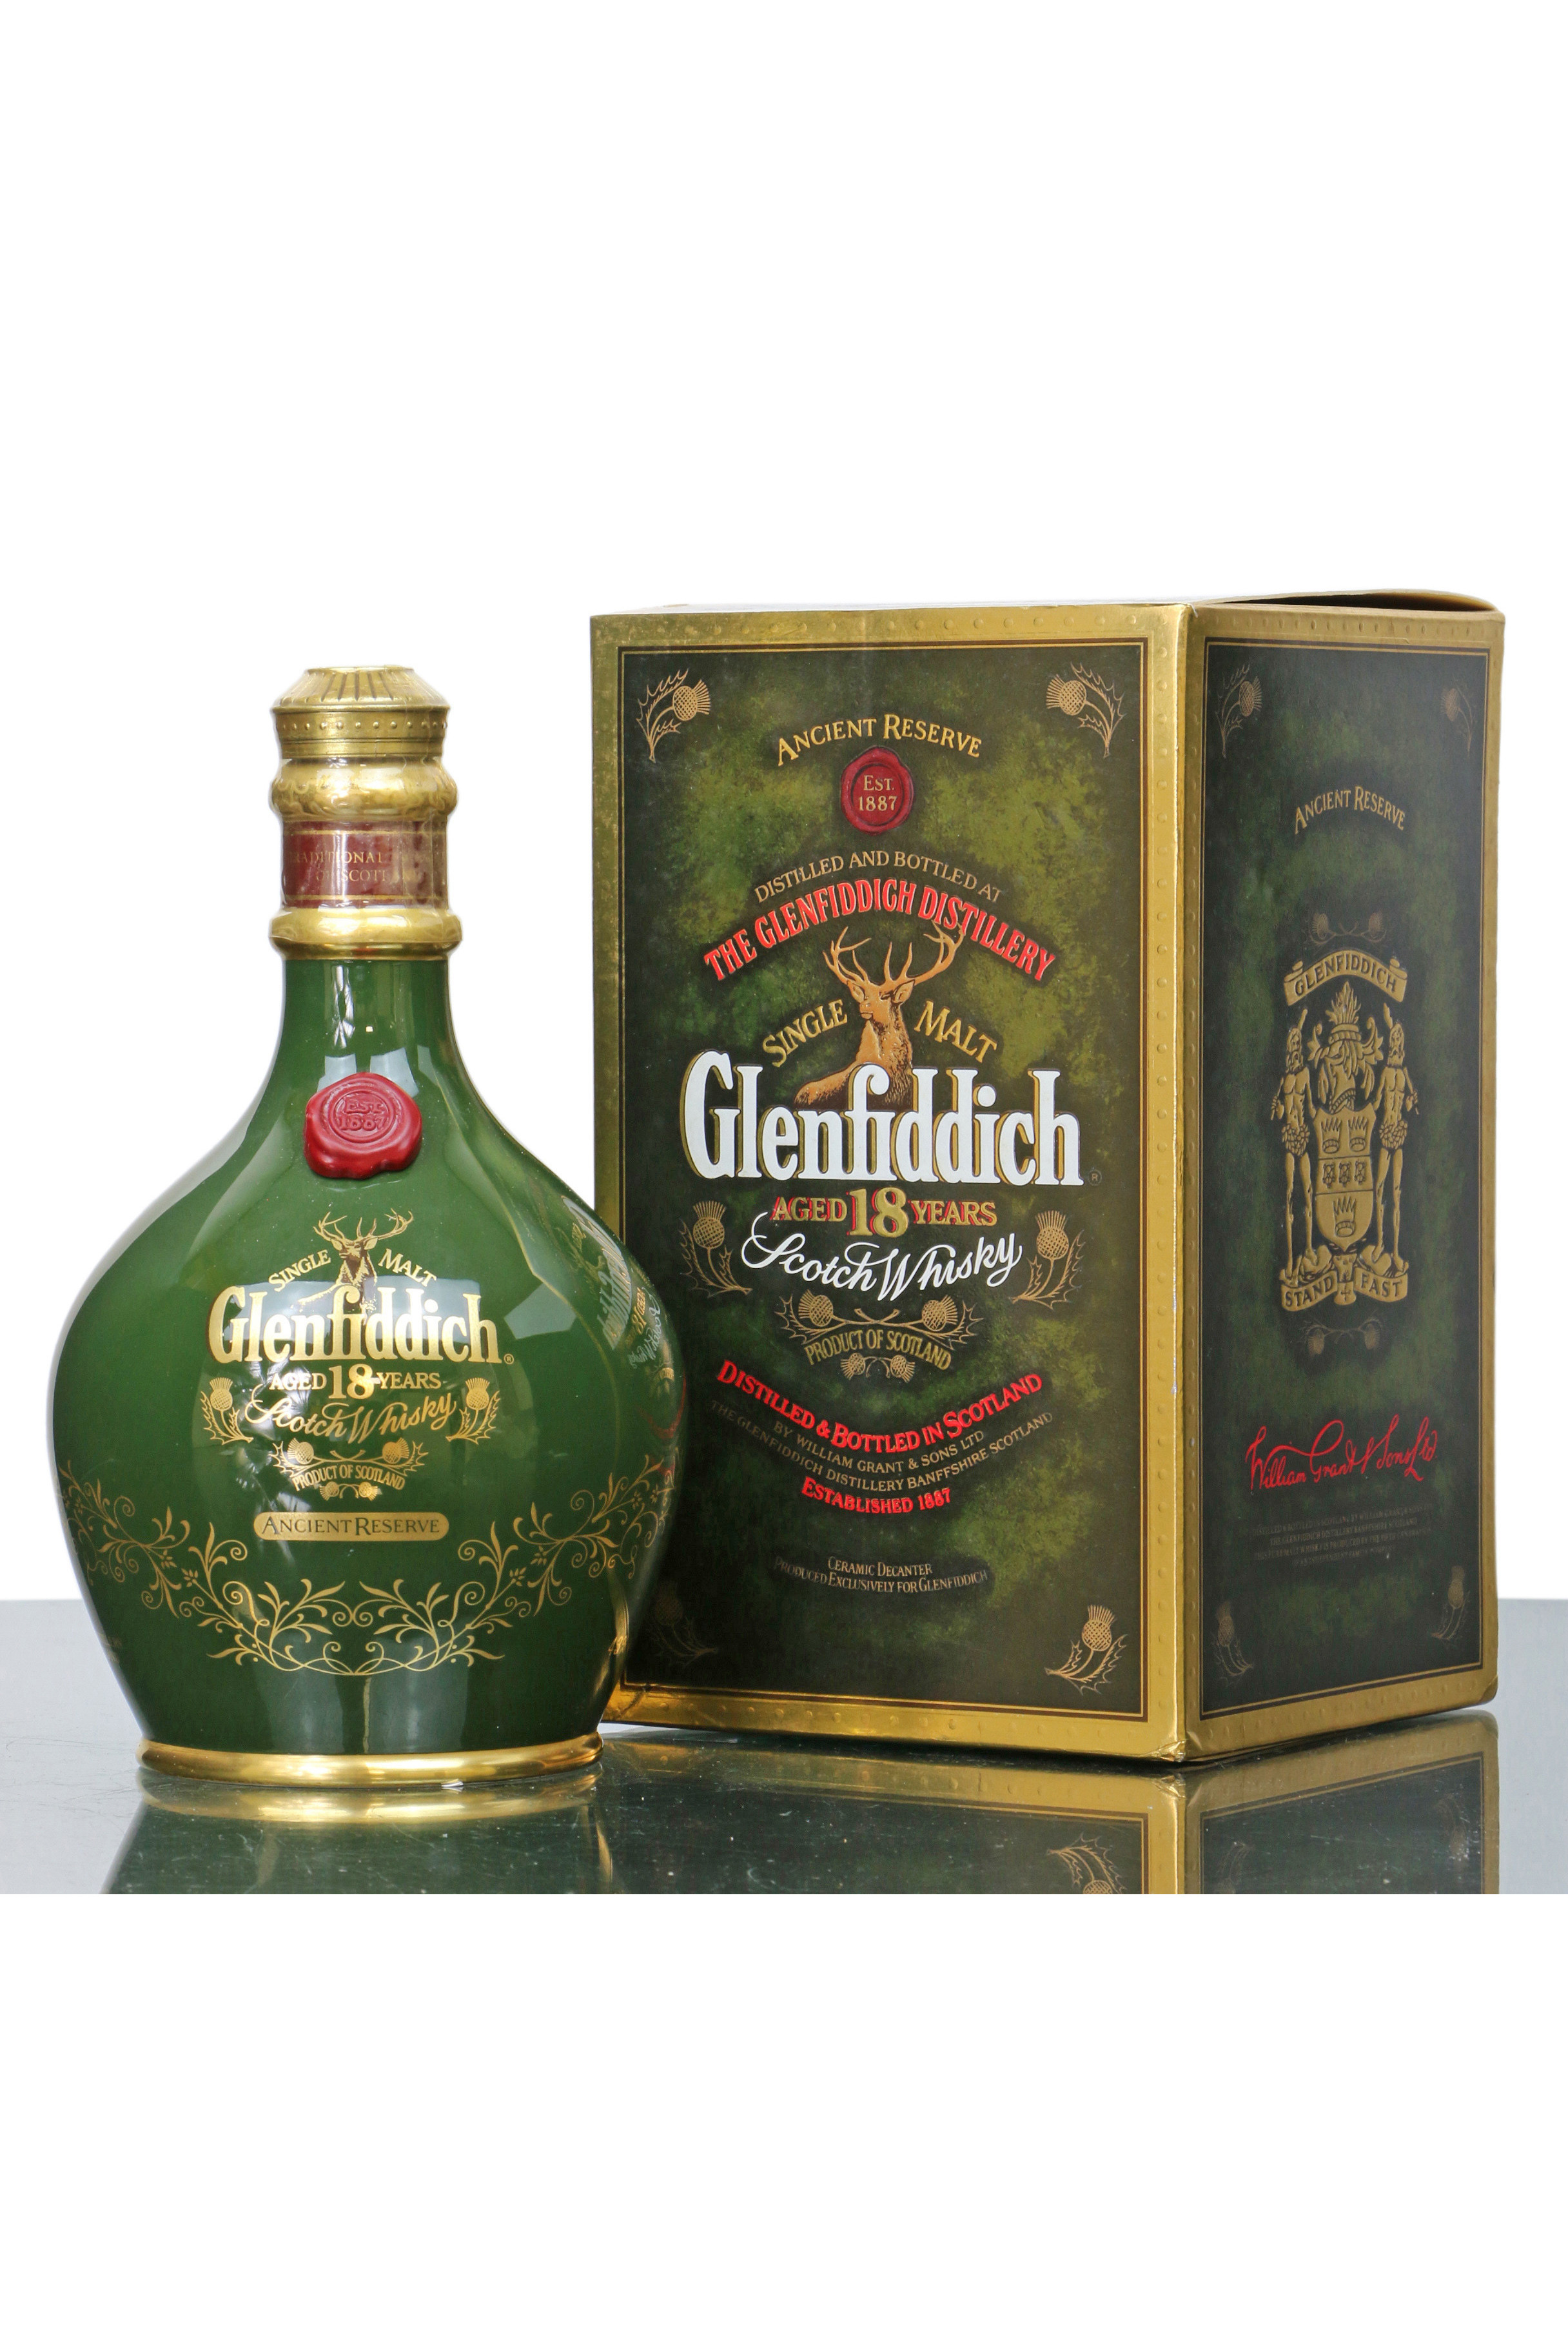 Glenfiddich 18 Years Old - Ancient Reserve Decanter - Just Whisky 